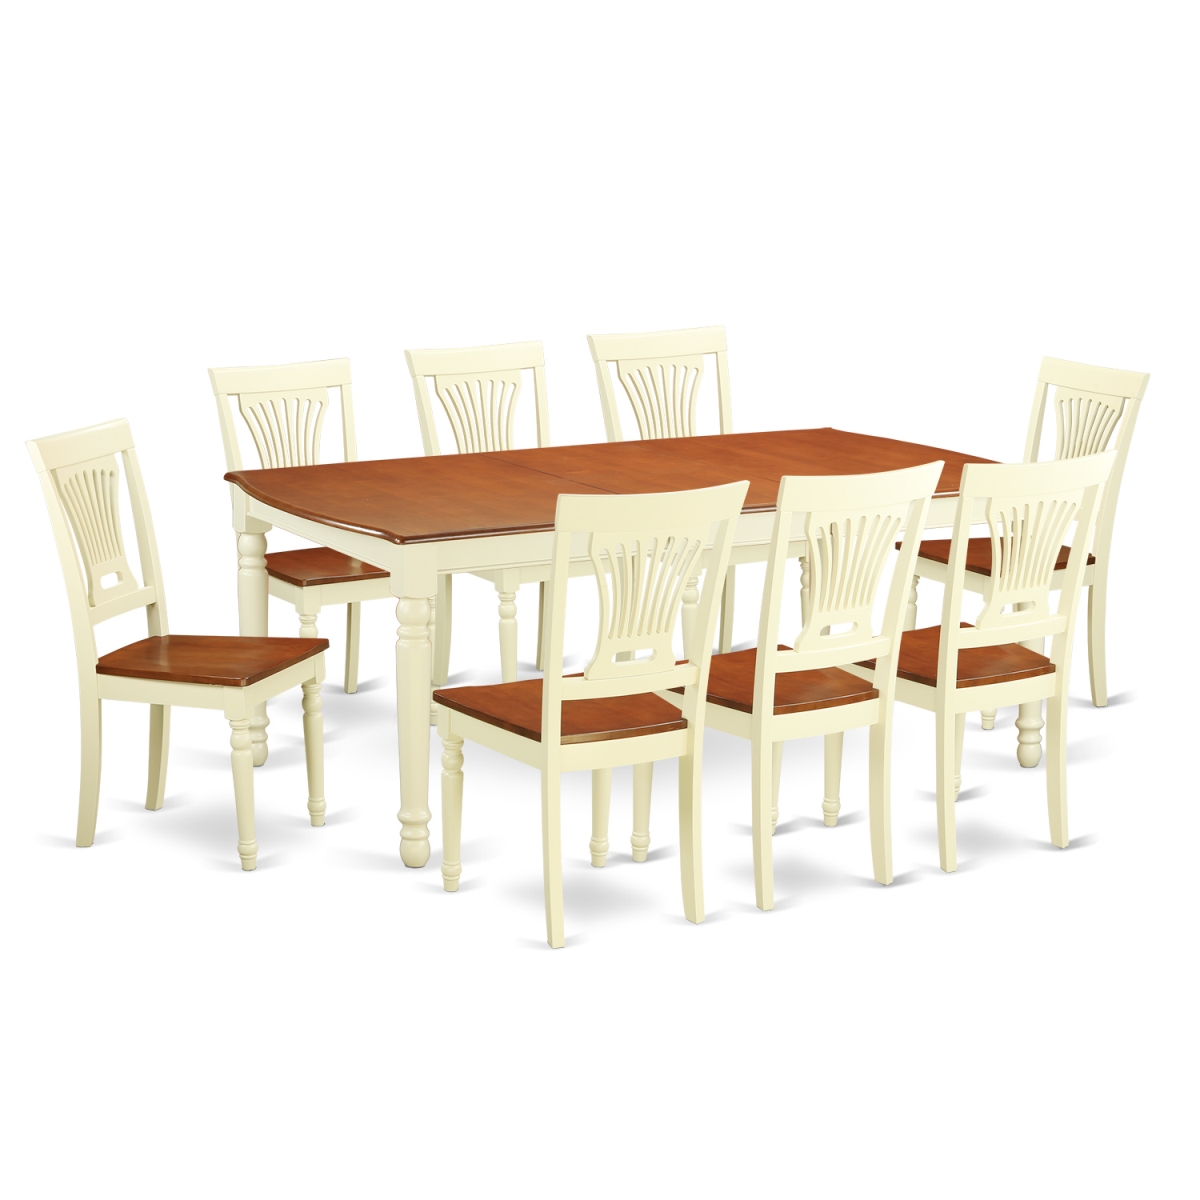 DOPL9-WHI-W Dining Table Set with 8 Dining Room Table & 8 Chairs, Buttermilk & Cherry - 9 Piece -  East West Furniture